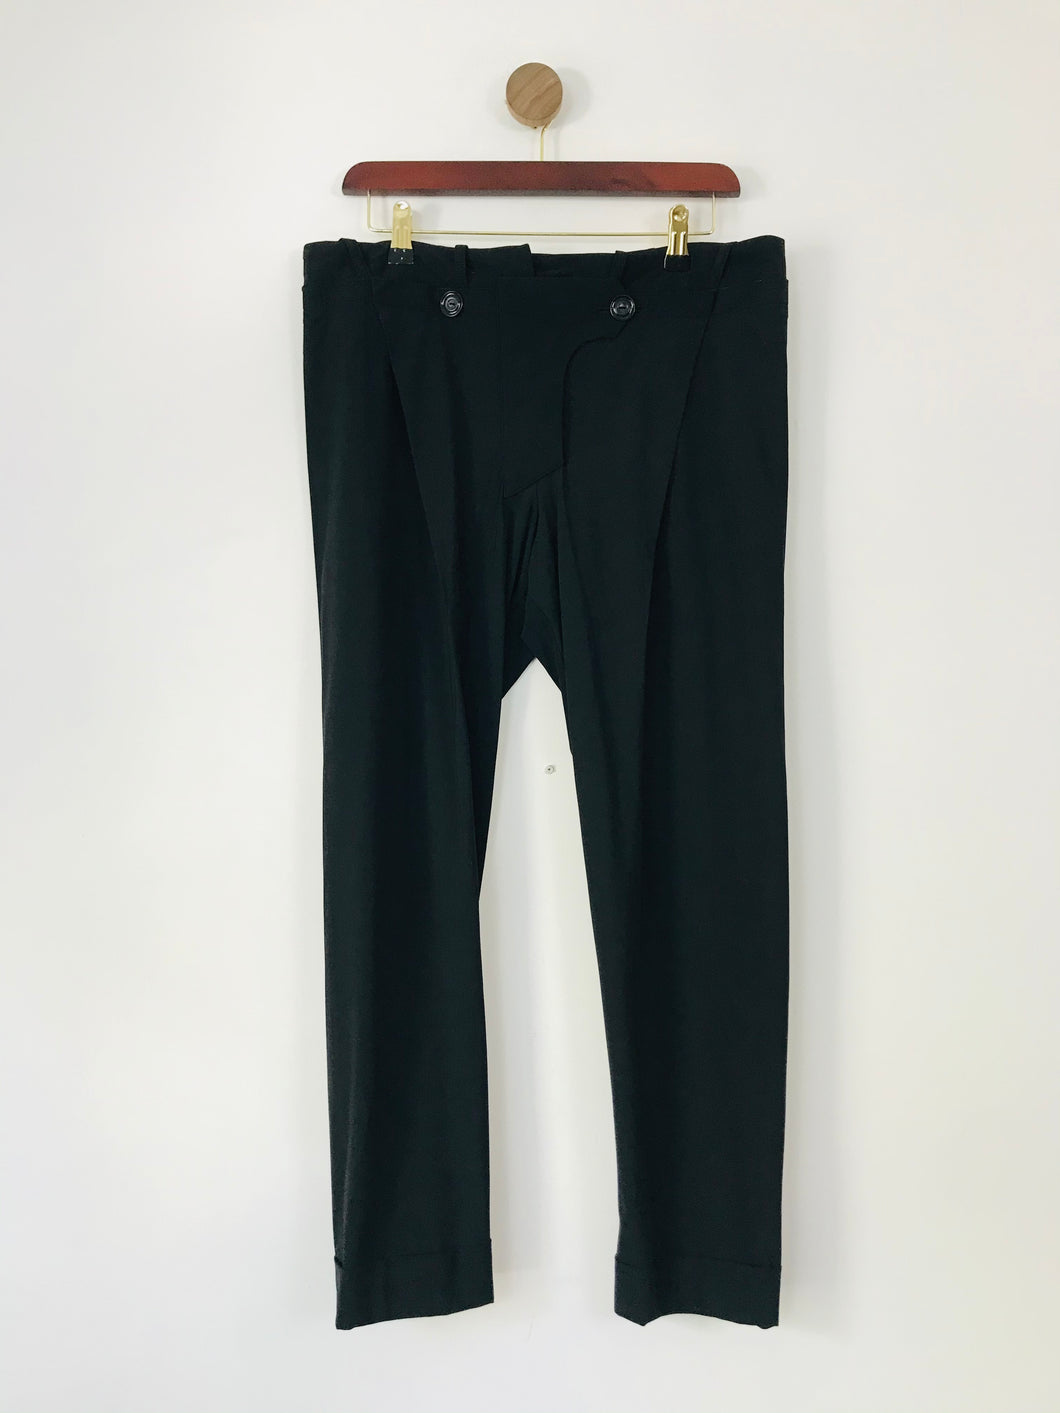 Marithe+Francois Girbaud Women's Chinos Trousers | 42 UK14 | Black